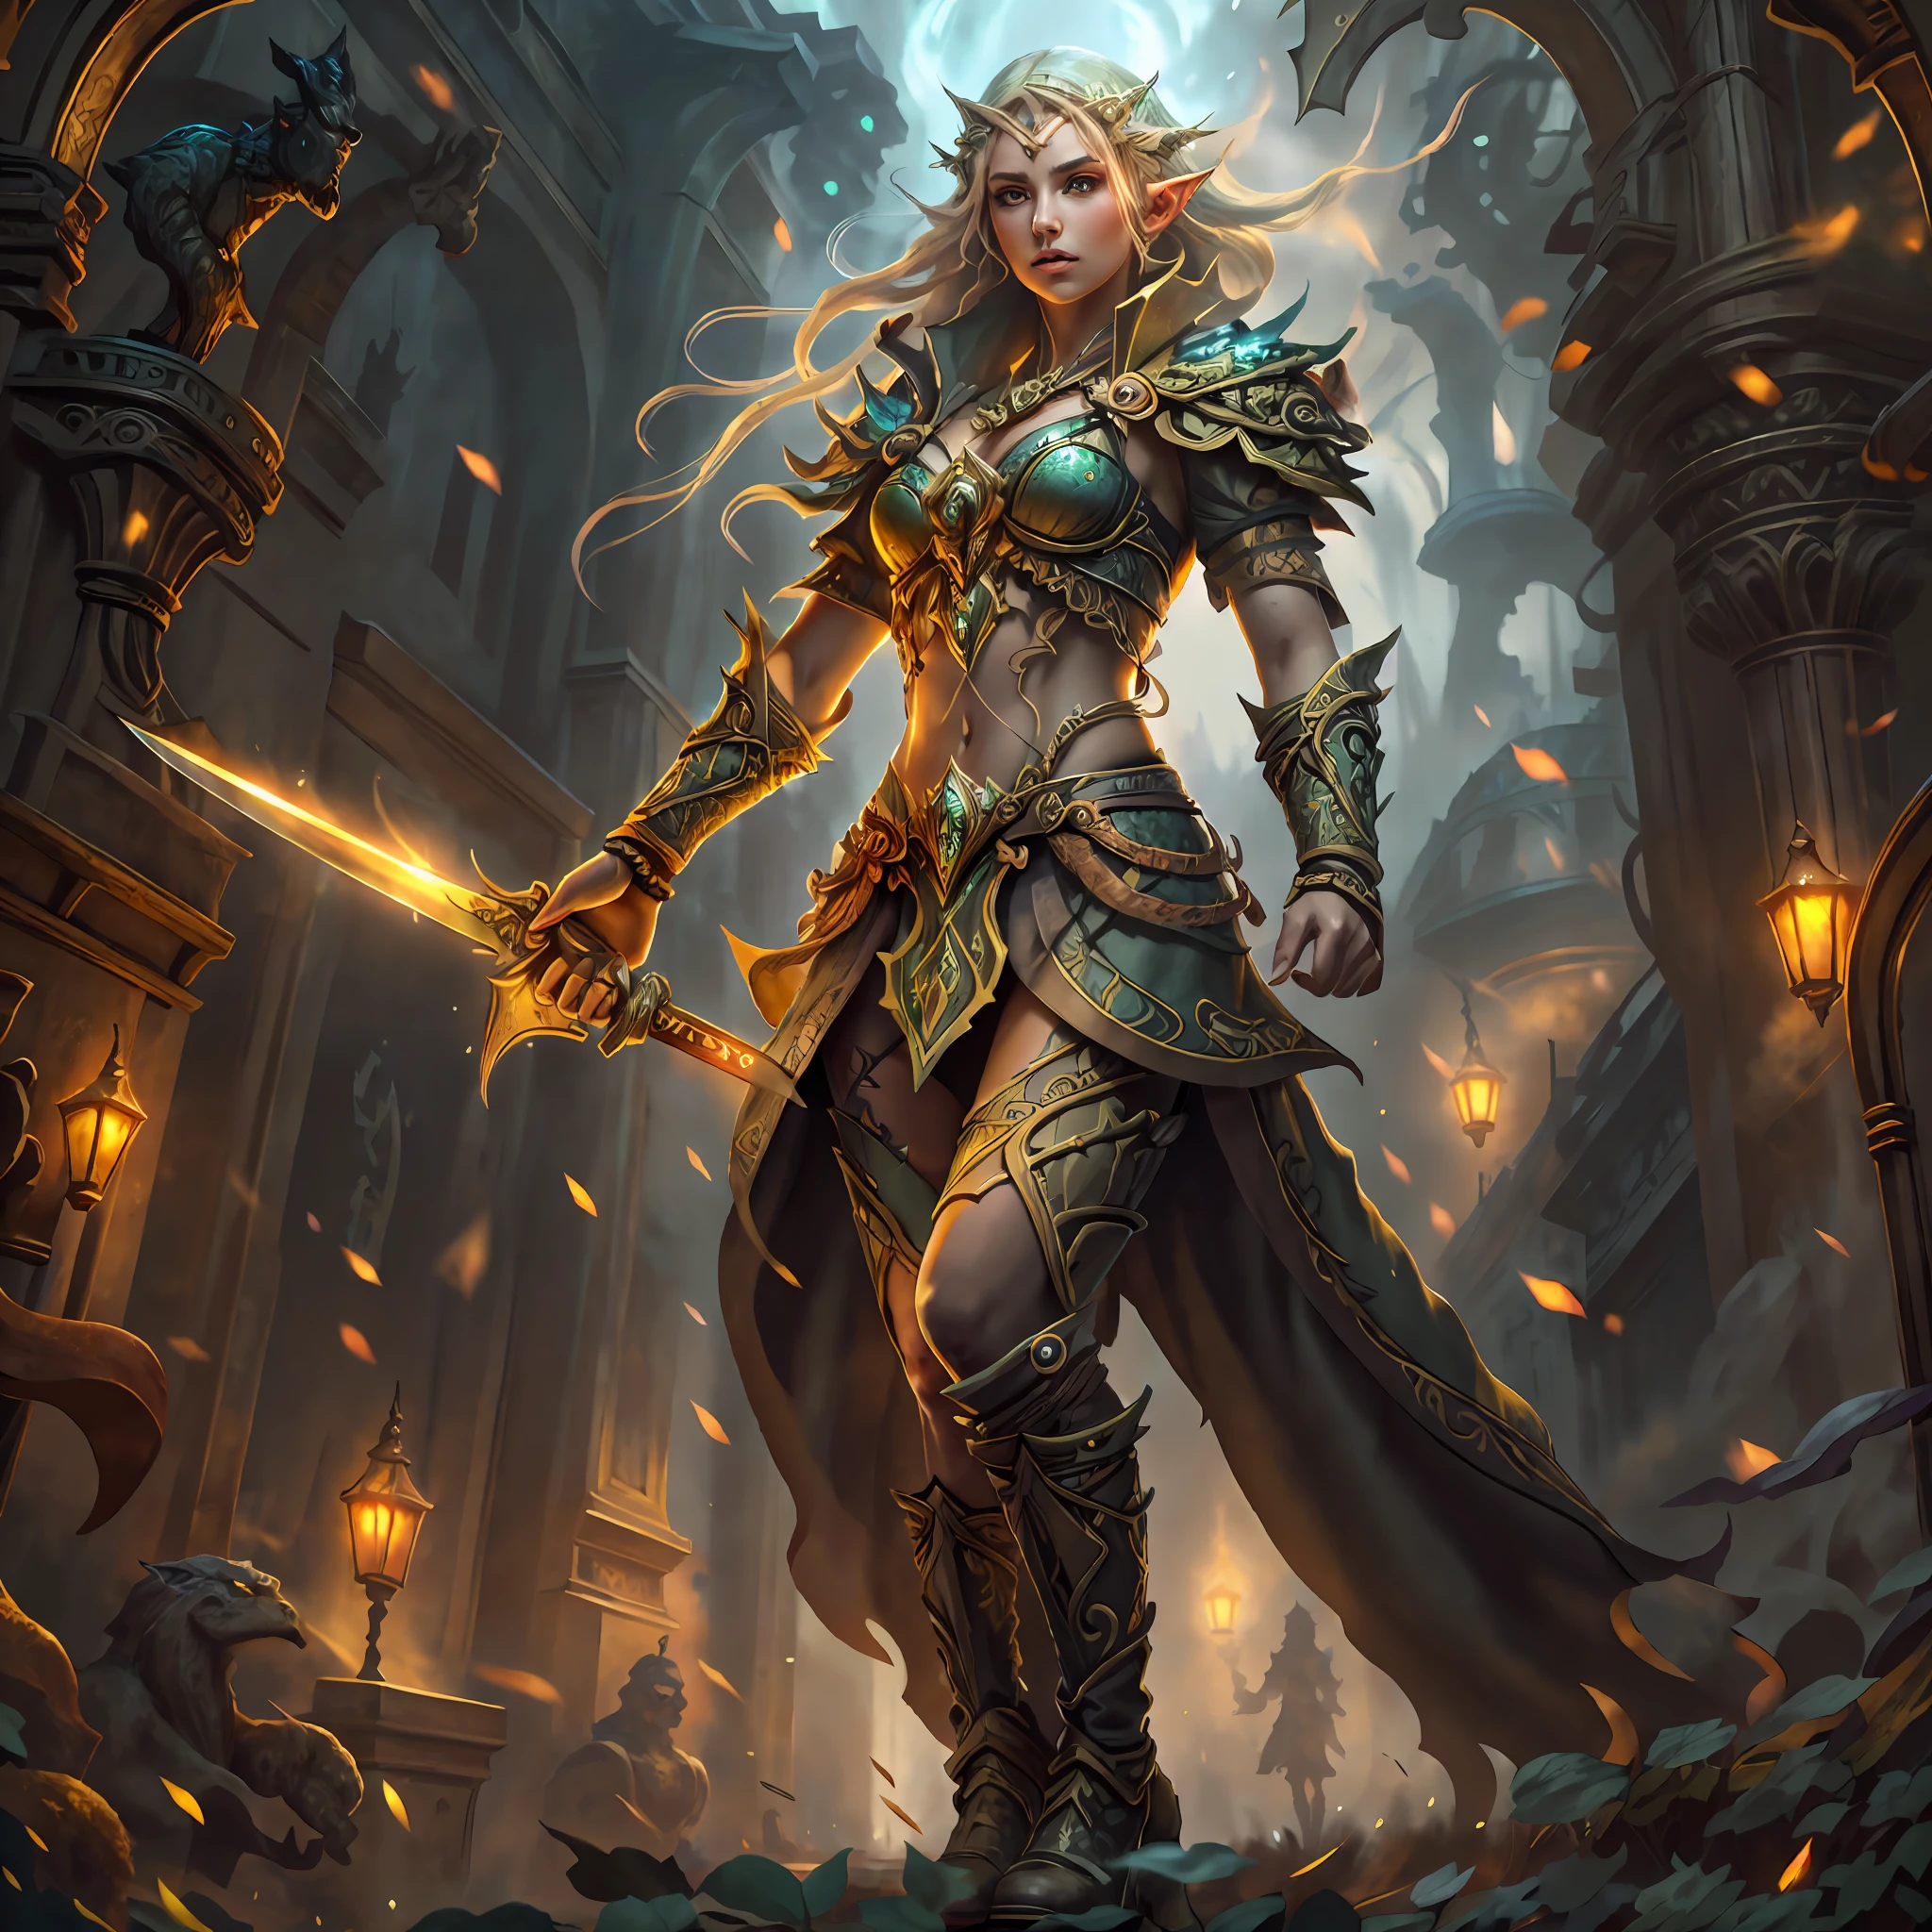 high details, best quality, 8k, [ultra detailed], masterpiece, best quality, (extremely detailed), full body, ultra wide shot, photorealistic, fantasy art, dnd art, rpg art, realistic art, a wide angle picture of an epic female elf, arcane warrior, warrior of magic, fighter of the arcana, full body, [[anatomically correct]] full body (intricate details, Masterpiece, best quality: 1.5) casting a spell (intricate details, Masterpiece, best quality: 1.5), casting an epic spell, [colorful magical sigils in the air],[ colorful arcane markings floating] (intricate details, Masterpiece, best quality: 1.5), holding an [epic magical sword] (1.5 intricate details, Masterpiece, best quality (intricate details, Masterpiece, best quality: 1.5) holding epic [magical sword glowing in red light(intricate details, Masterpiece, best quality: 1.5). in fantasy urban street),(intricate details, Masterpiece, best quality: 1.5), a female beautiful epic elf wearing elven leather armor(intricate details, Masterpiece, best quality: 1.5), high heeled leather boots, ultra detailed face,  thick hair, long hair, dynamic hair, fair skin intense eyes, fantasy city background (intense details), sun light, backlight, depth of field (1.4 intricate details, Masterpiece, best quality), full body, (intricate details, Masterpiece, best quality: 1.5), high details, best quality, highres, ultra wide angle